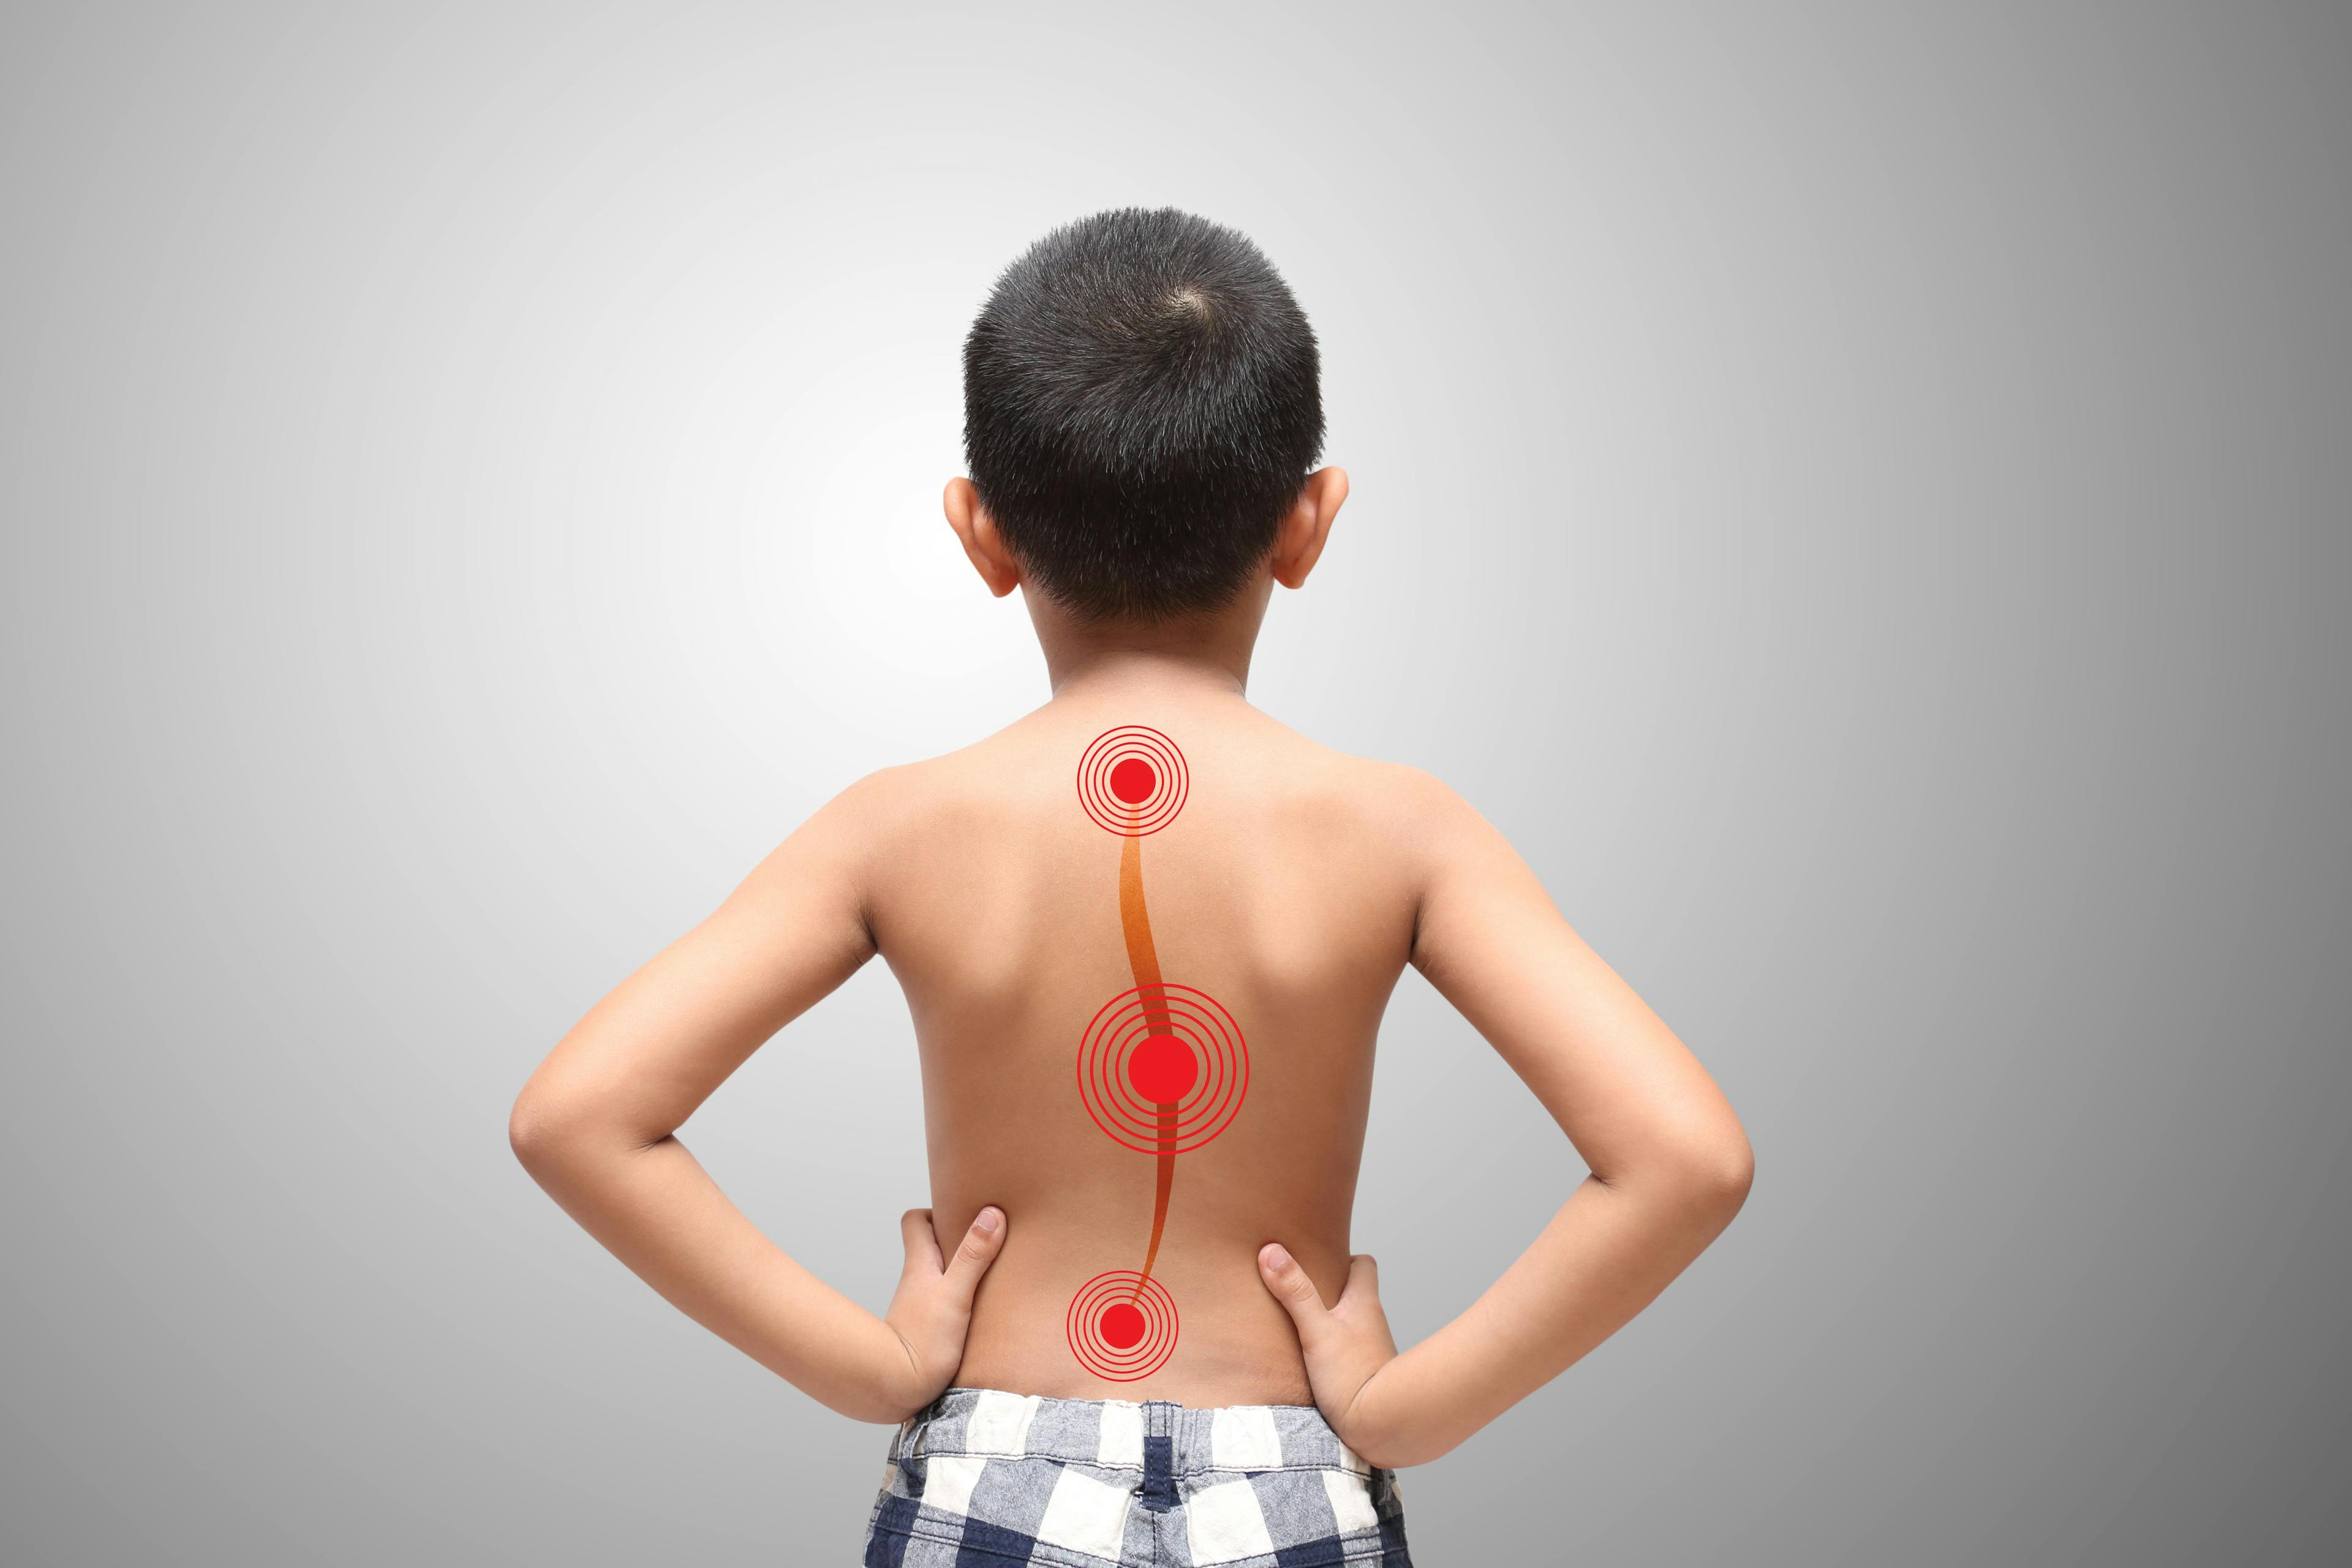 Kid with scoliosis, isolated on white background - Image credit: Jeffy1139 | stock.adobe.com 